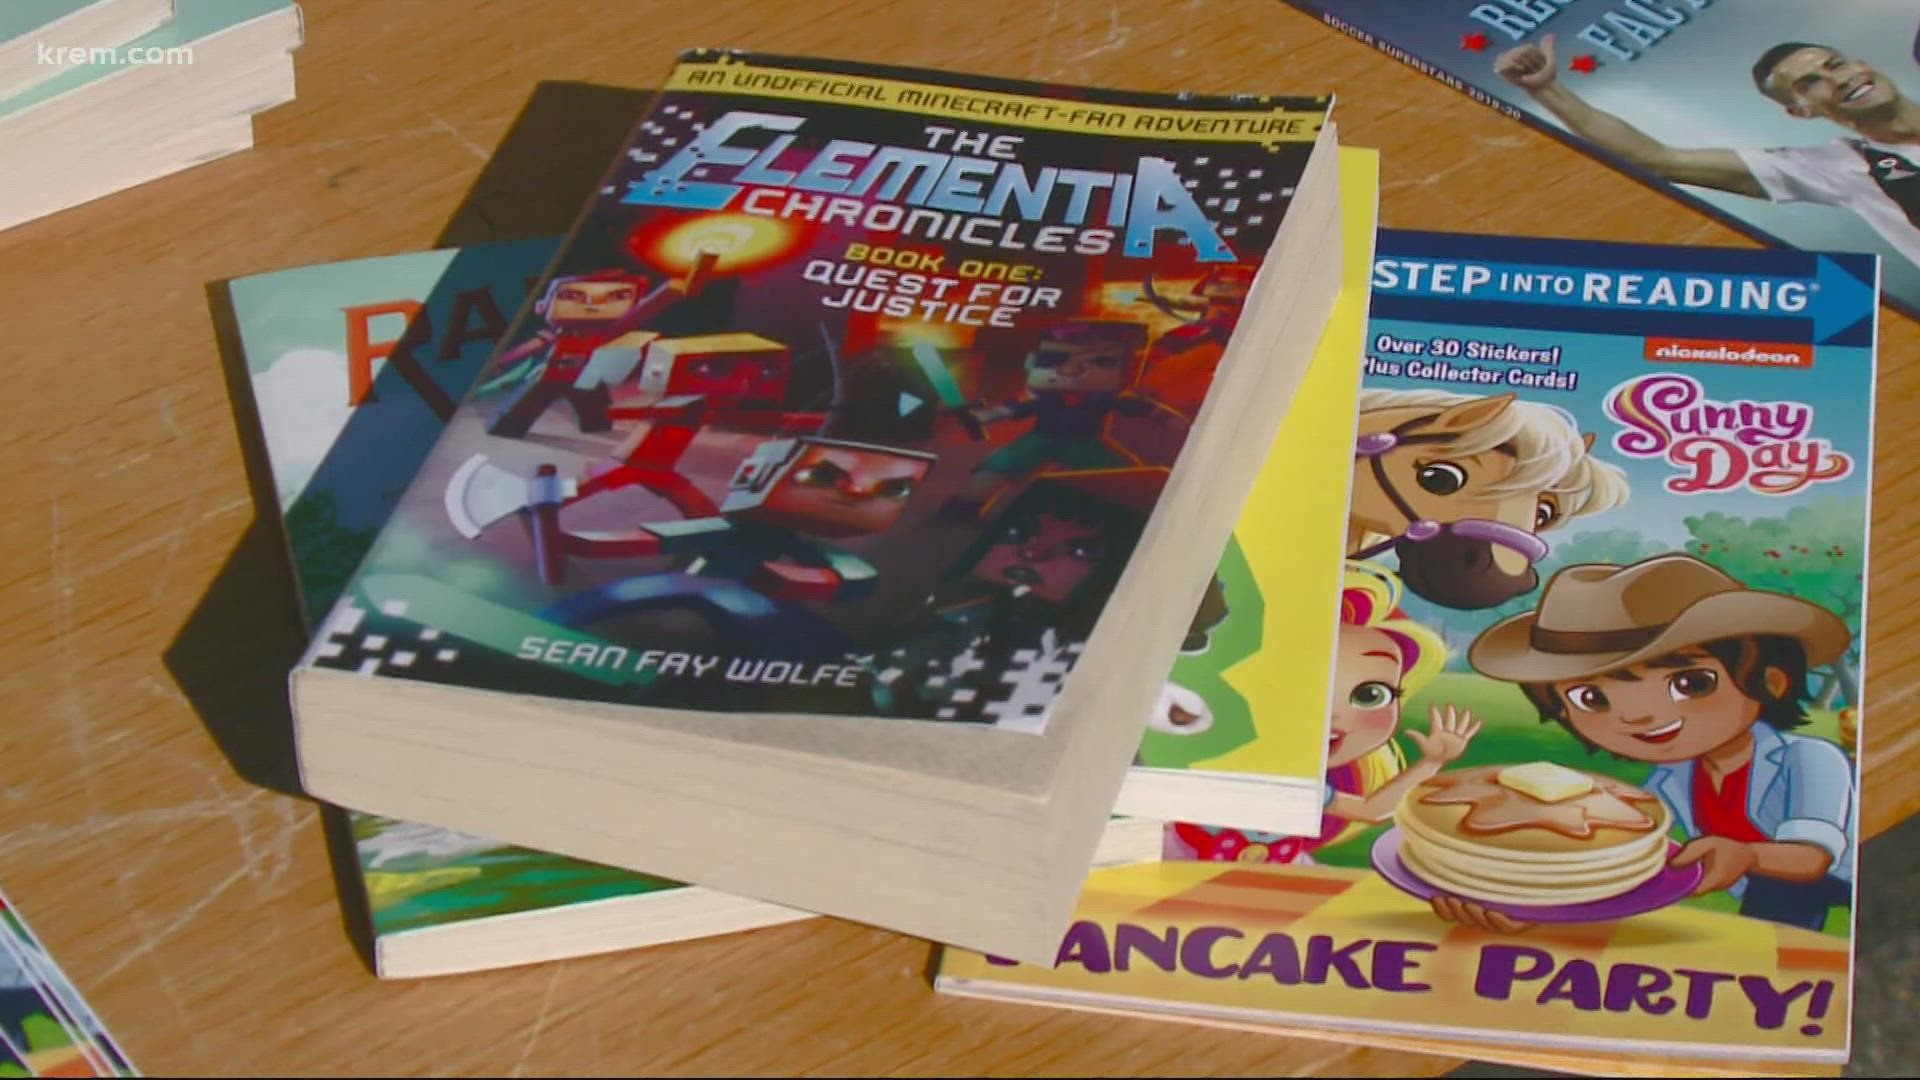 The KREM Cares Big Book Giveaway will be held on Wednesday at the Spokane County Fairgrounds.